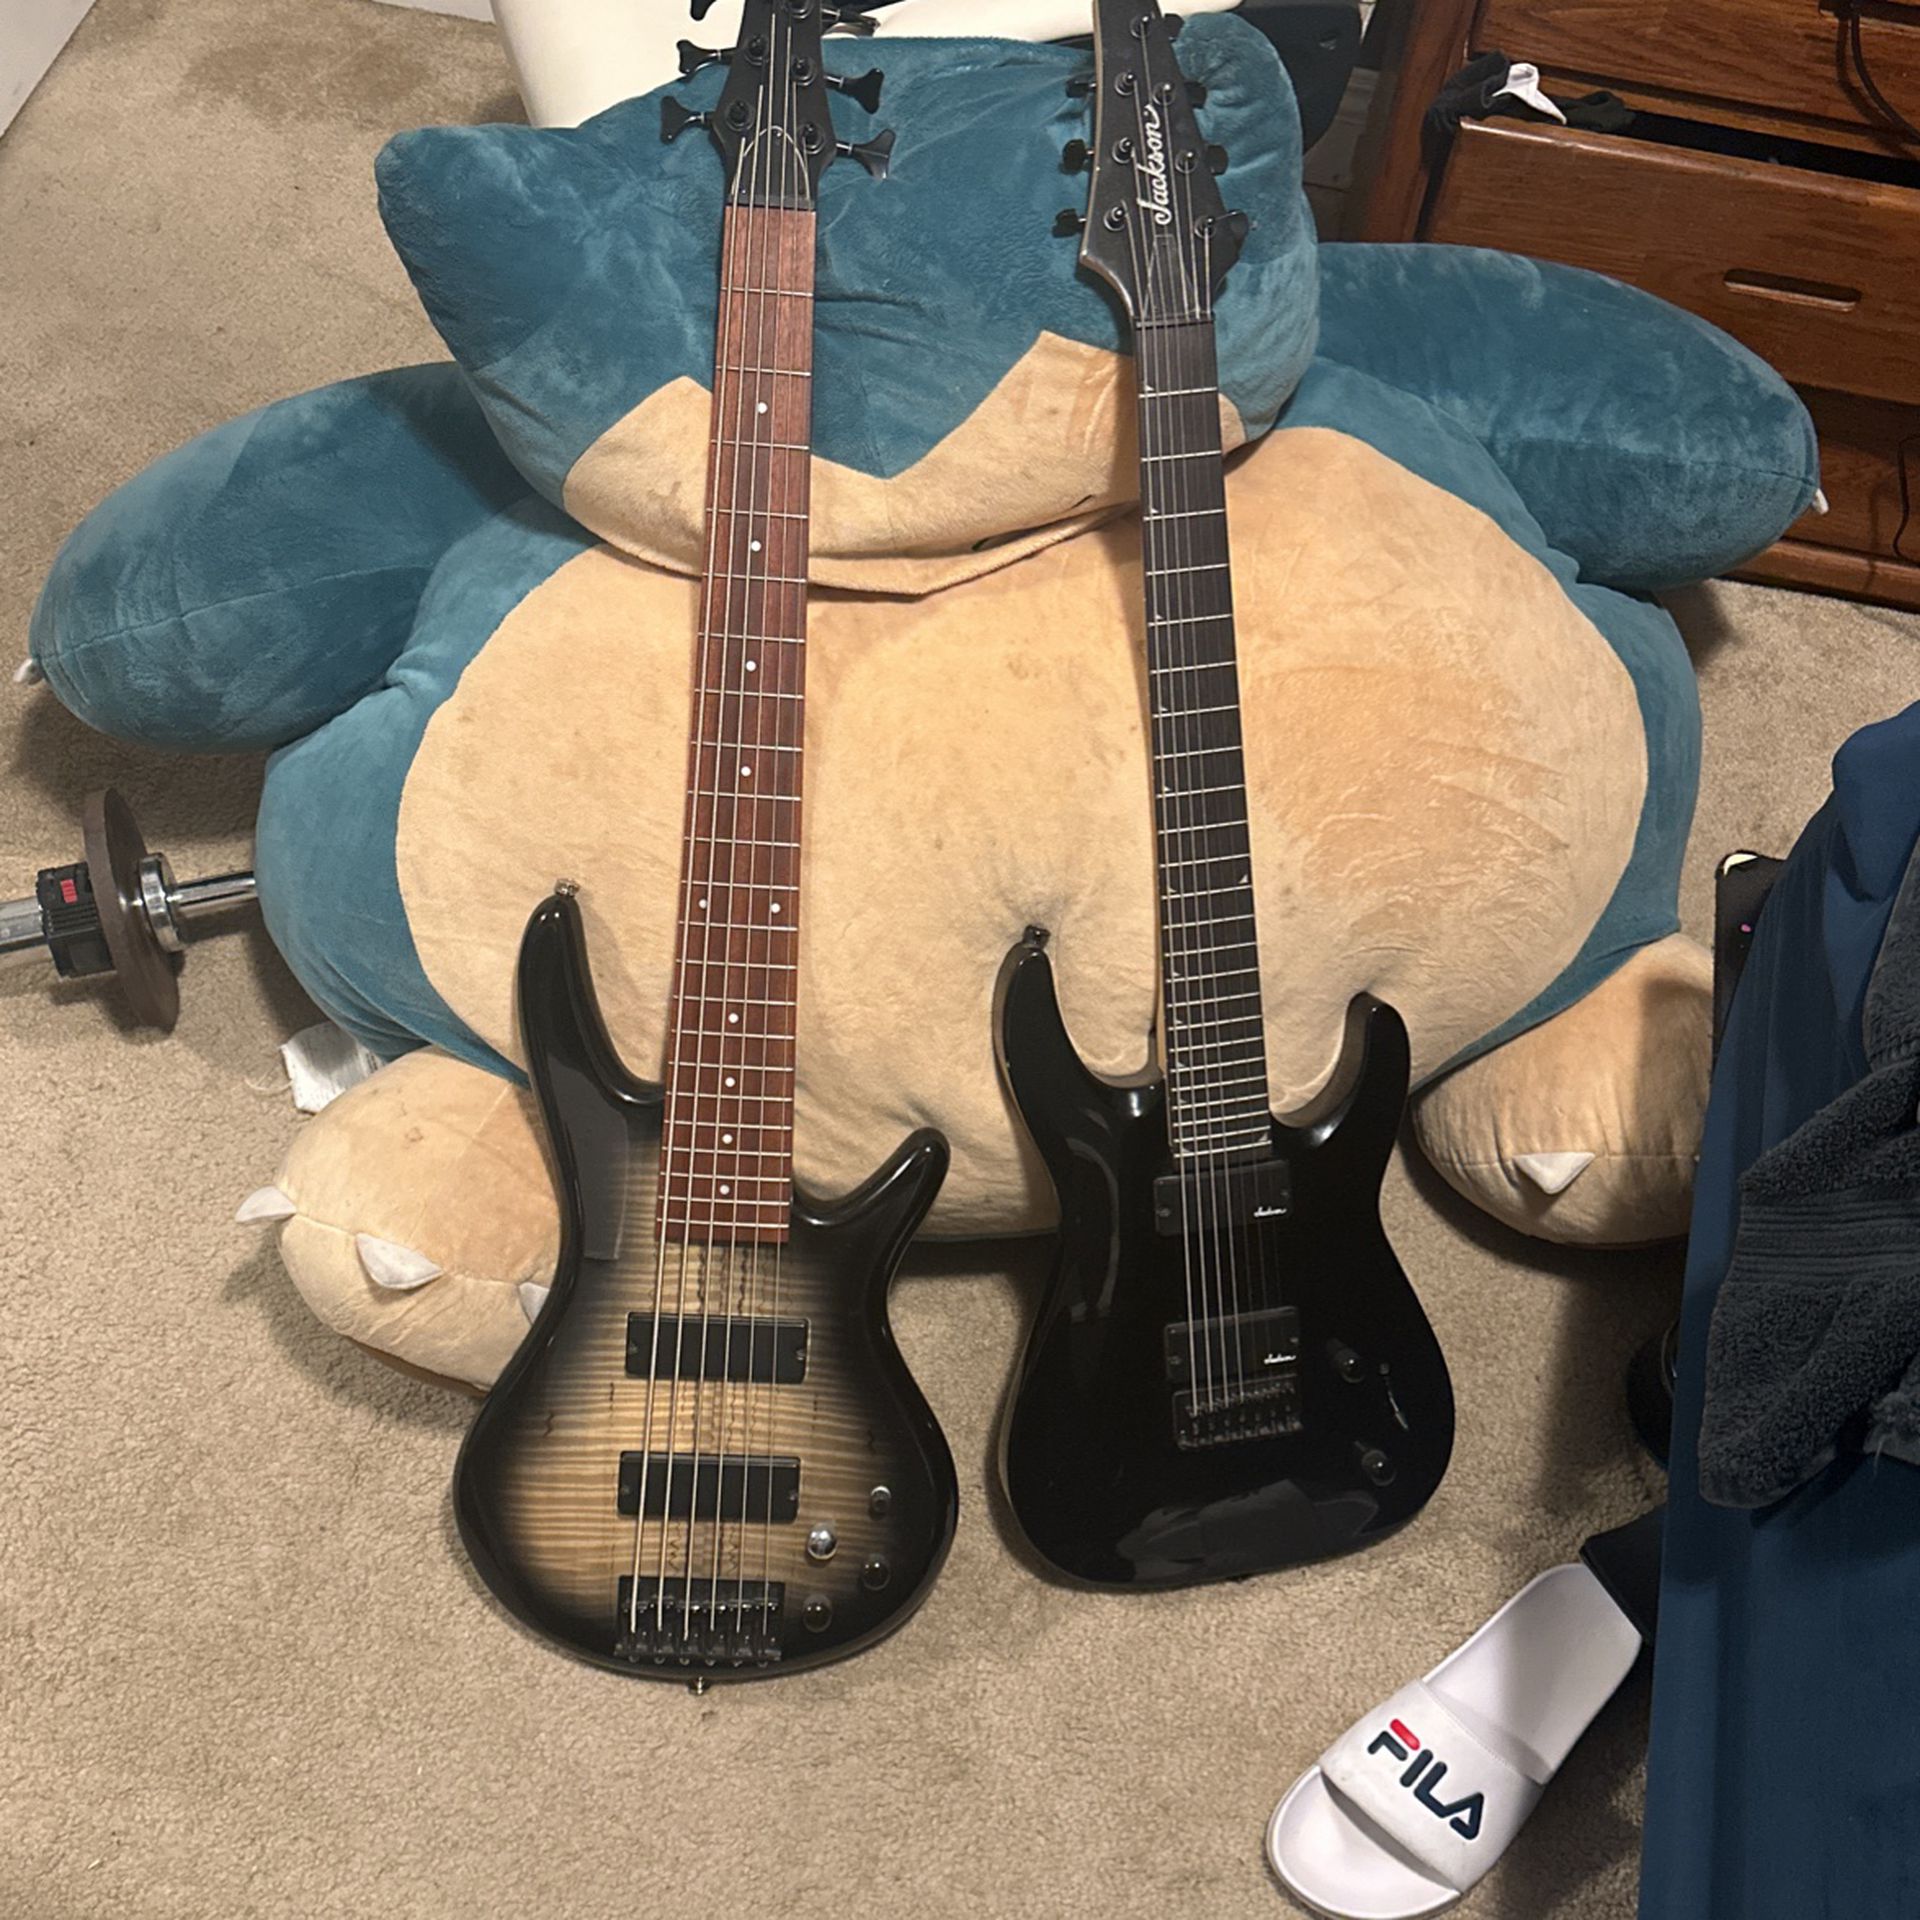 Ibanez 6 String And Jackson 7 String Guitar And Bass